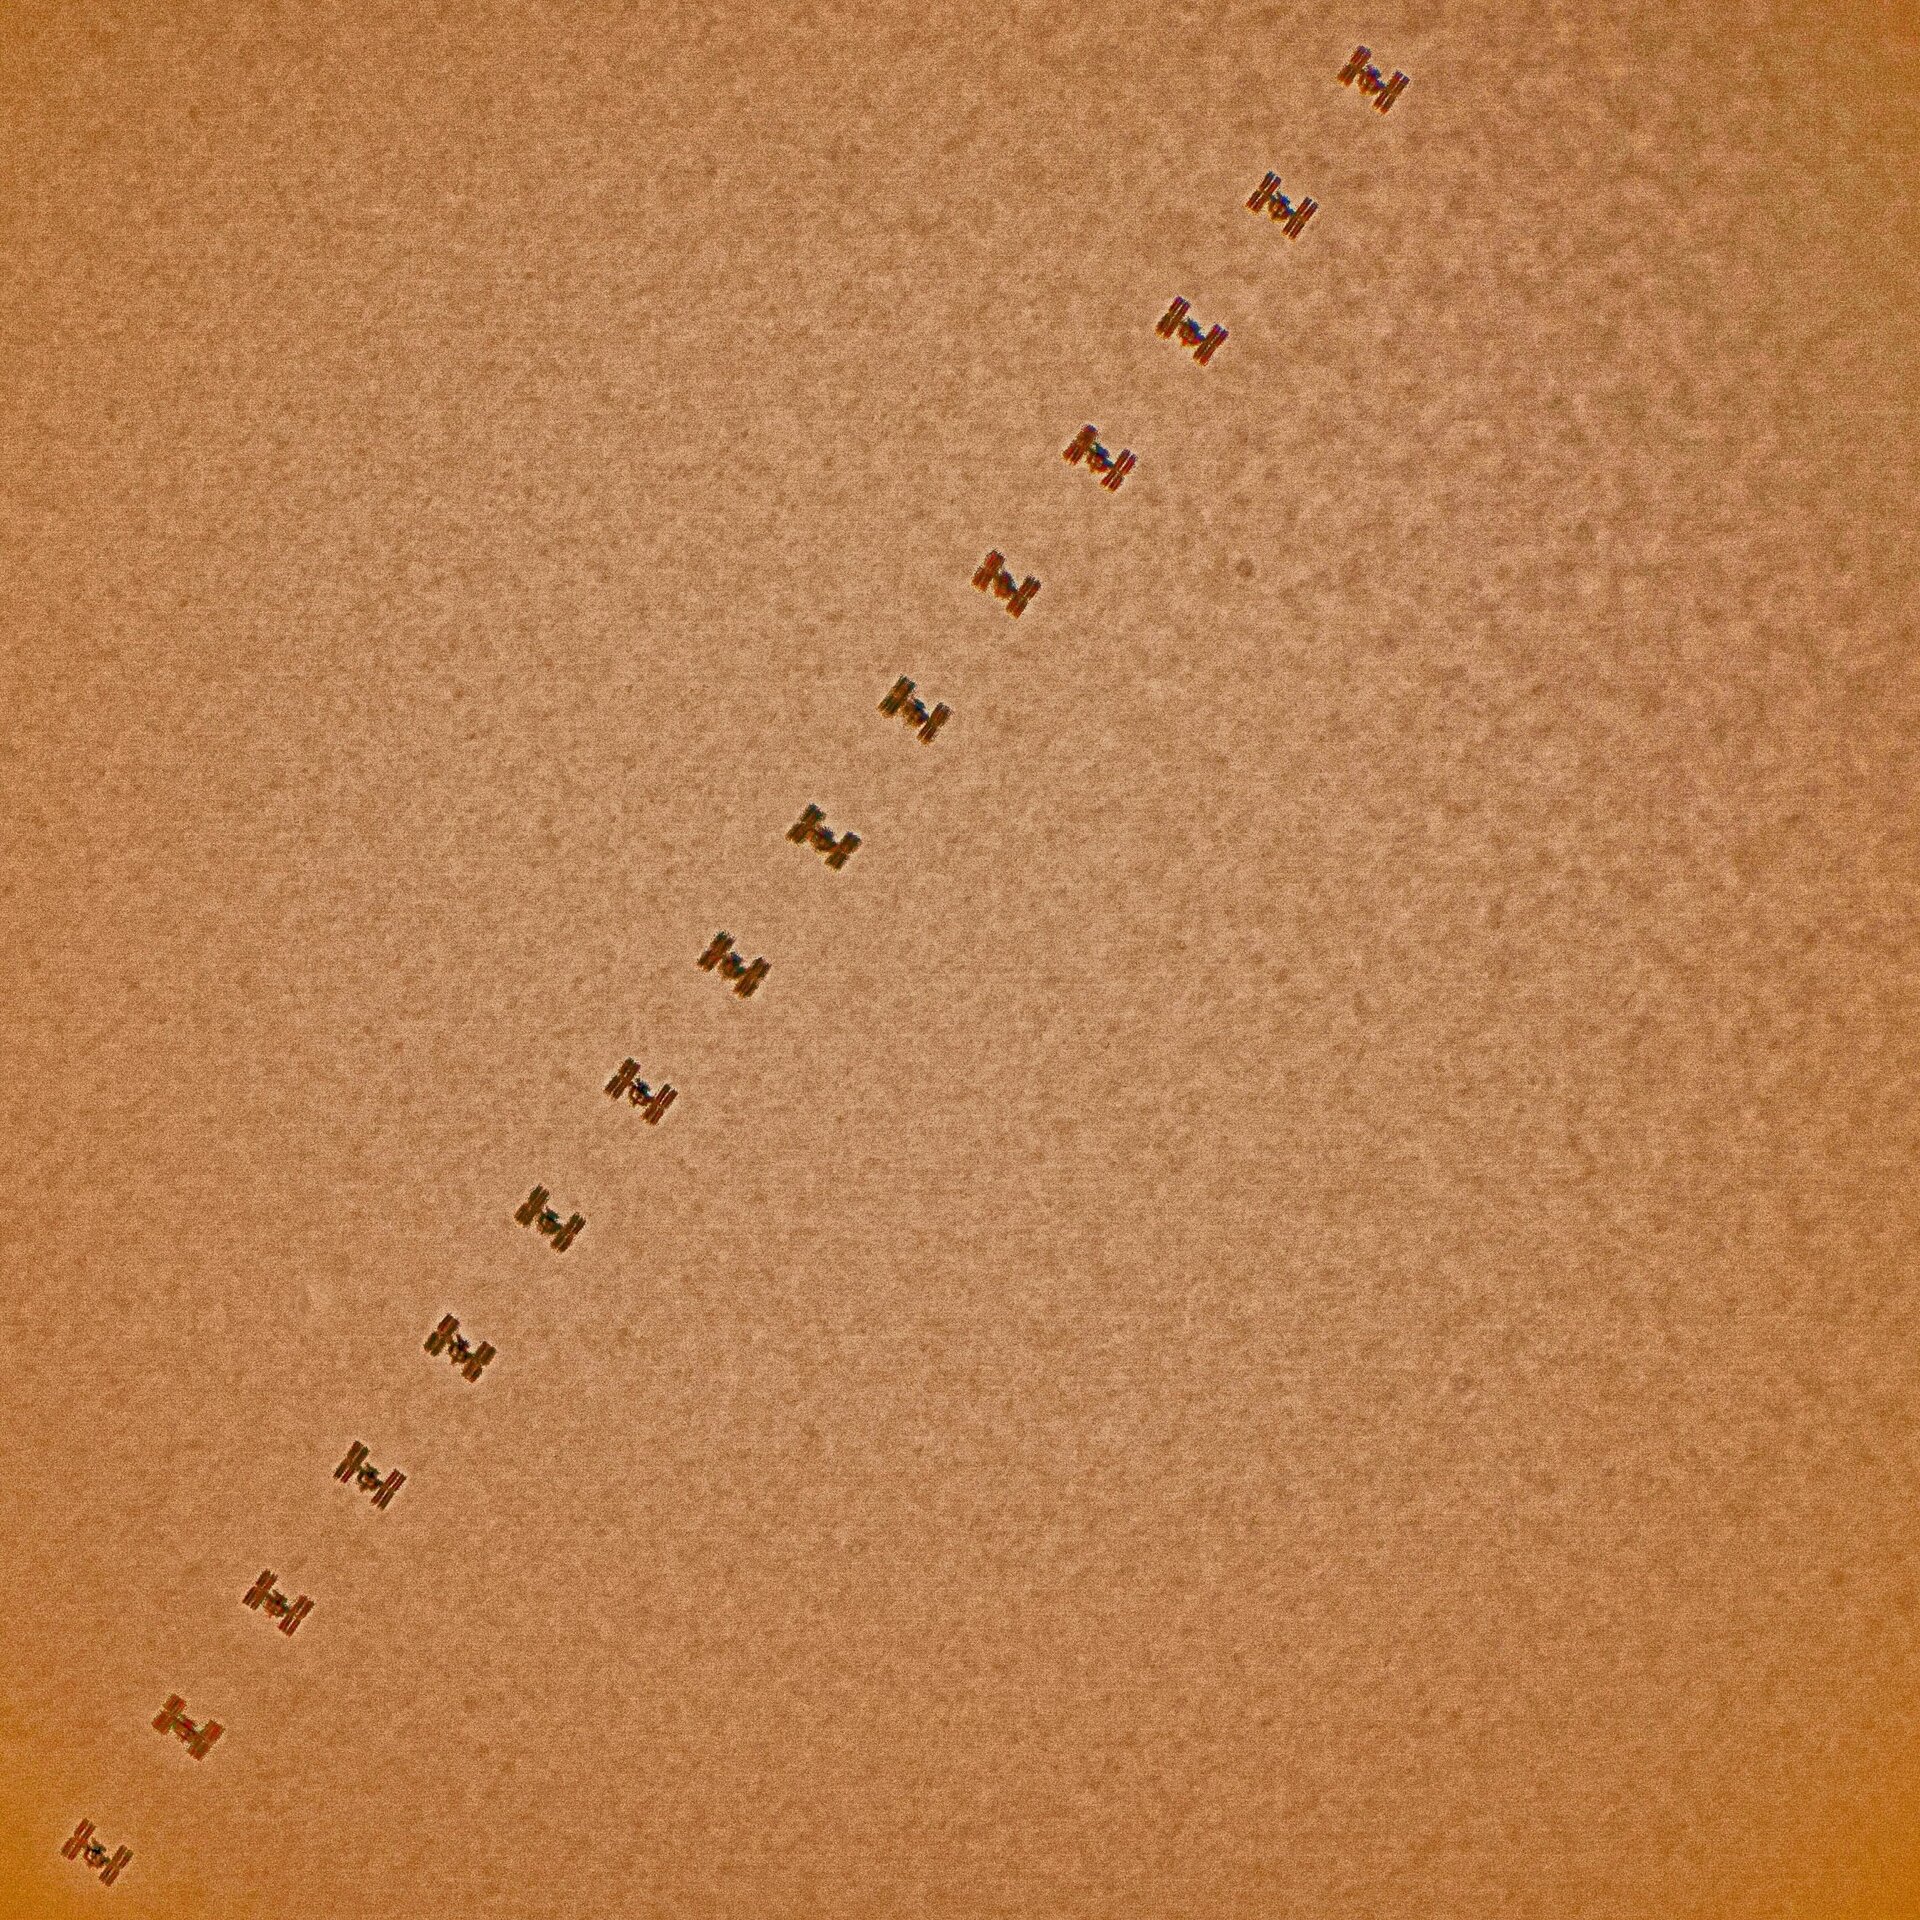 ISS transits the Sun, Space Weather